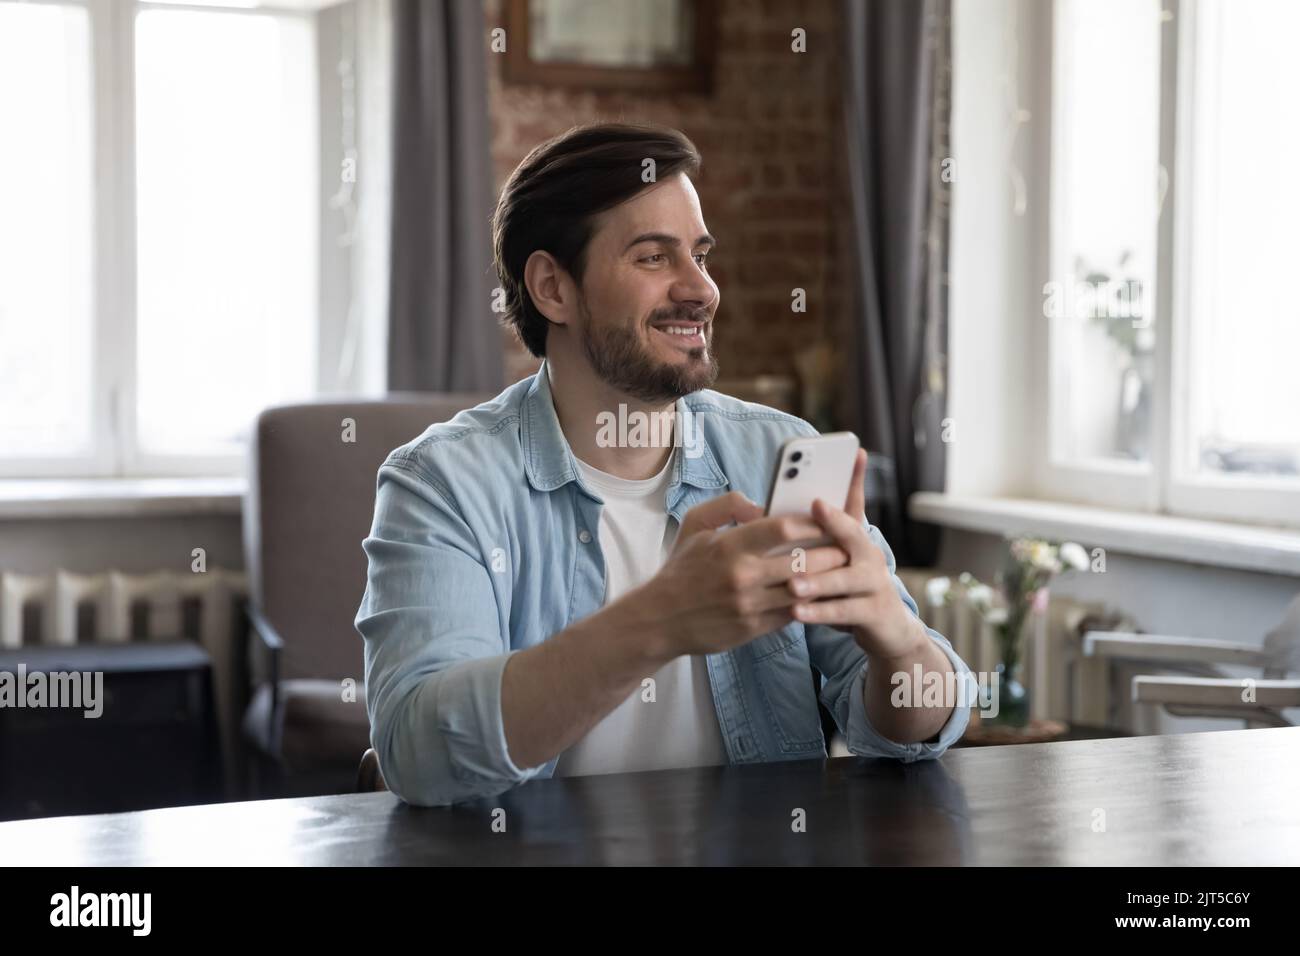 Cheerful dreamy millennial cellphone user man holding mobile phone Stock Photo